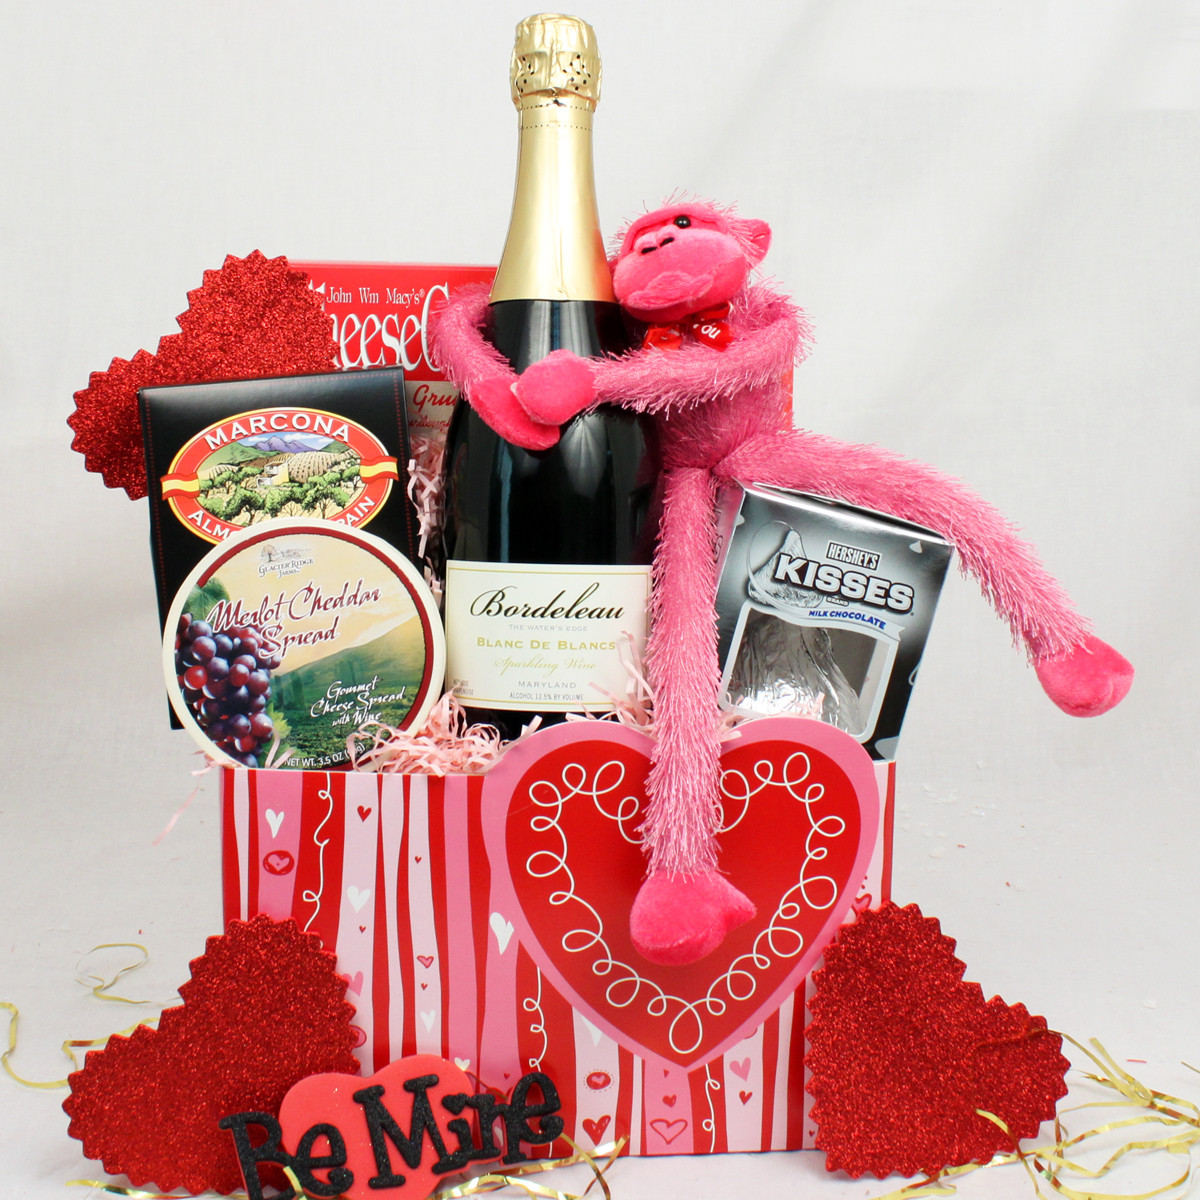 Valentine Day Creative Gift Ideas
 Creative and Thoughtful Valentine’s Day Gifts for Her